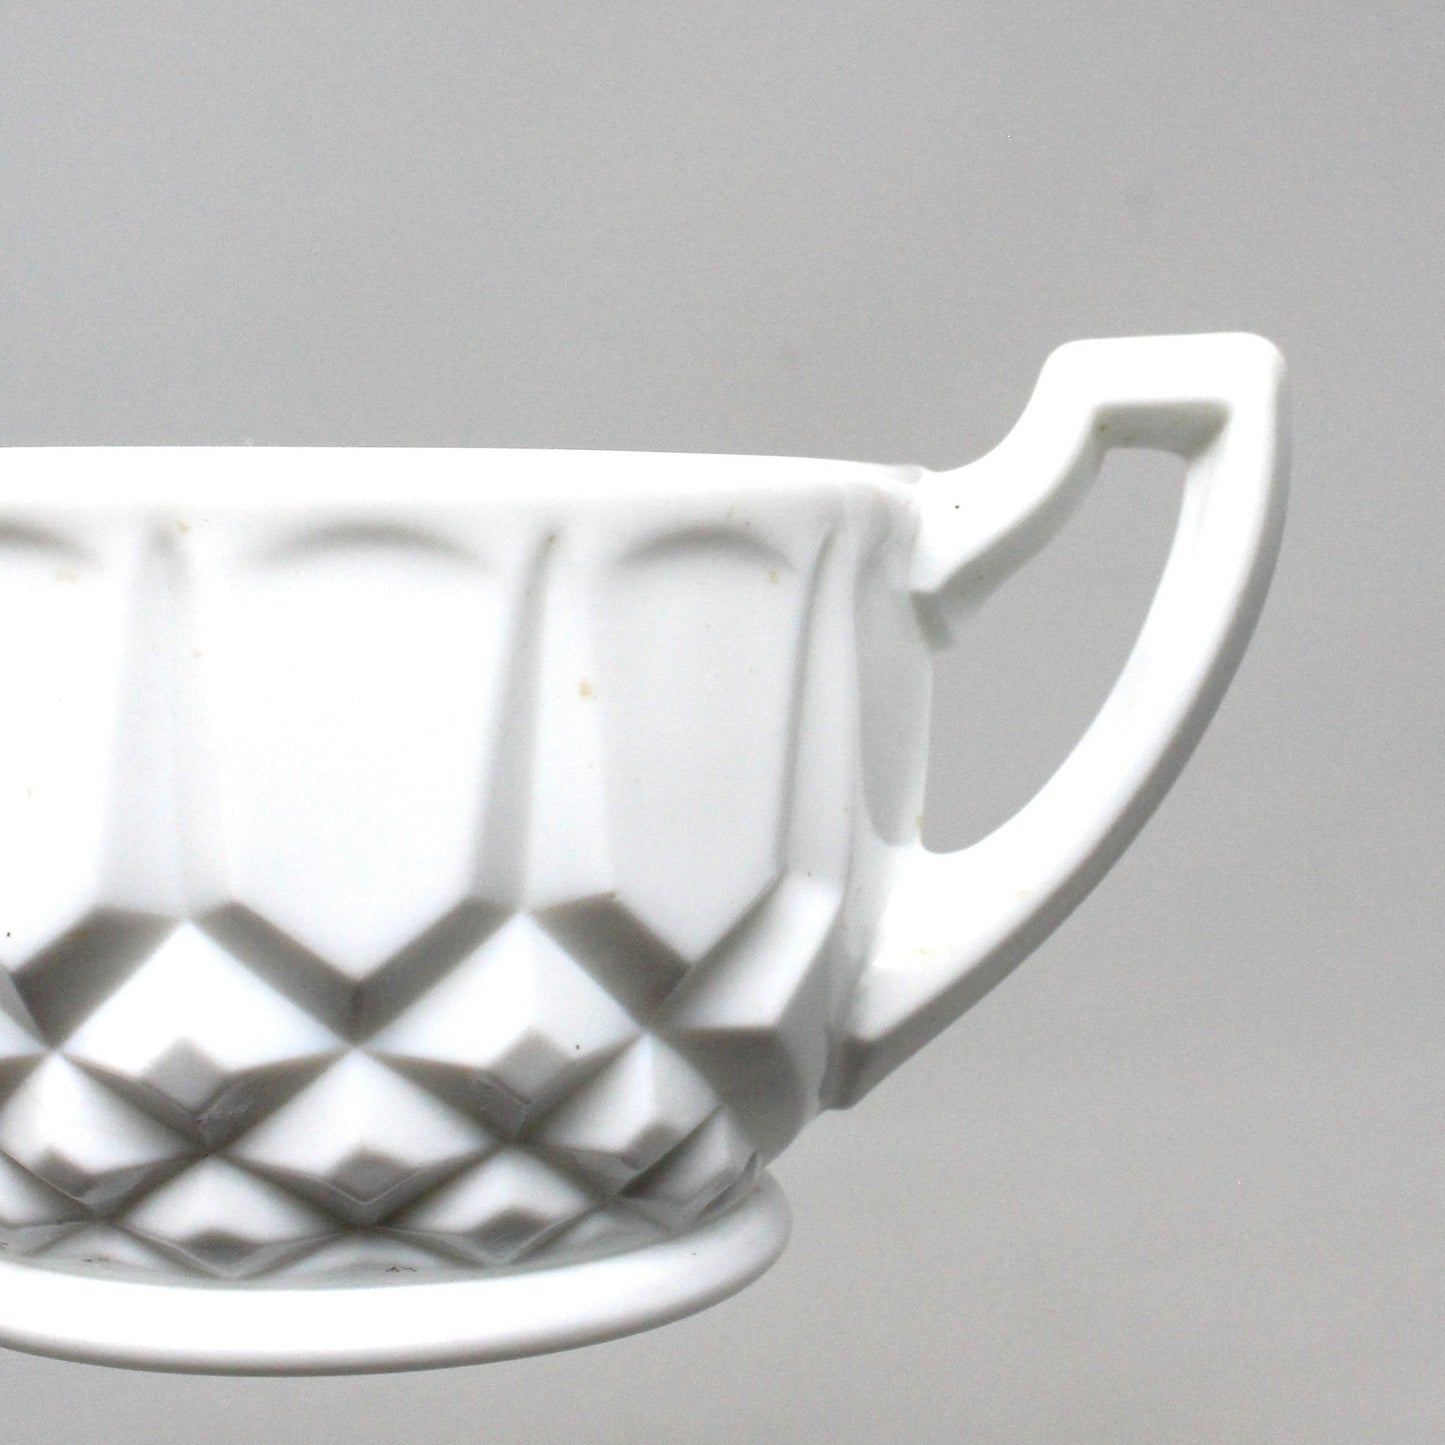 Sugar Bowl with Lid, Tiffin-Franciscan Milk Glass, Betsy Ross Pattern, Vintage